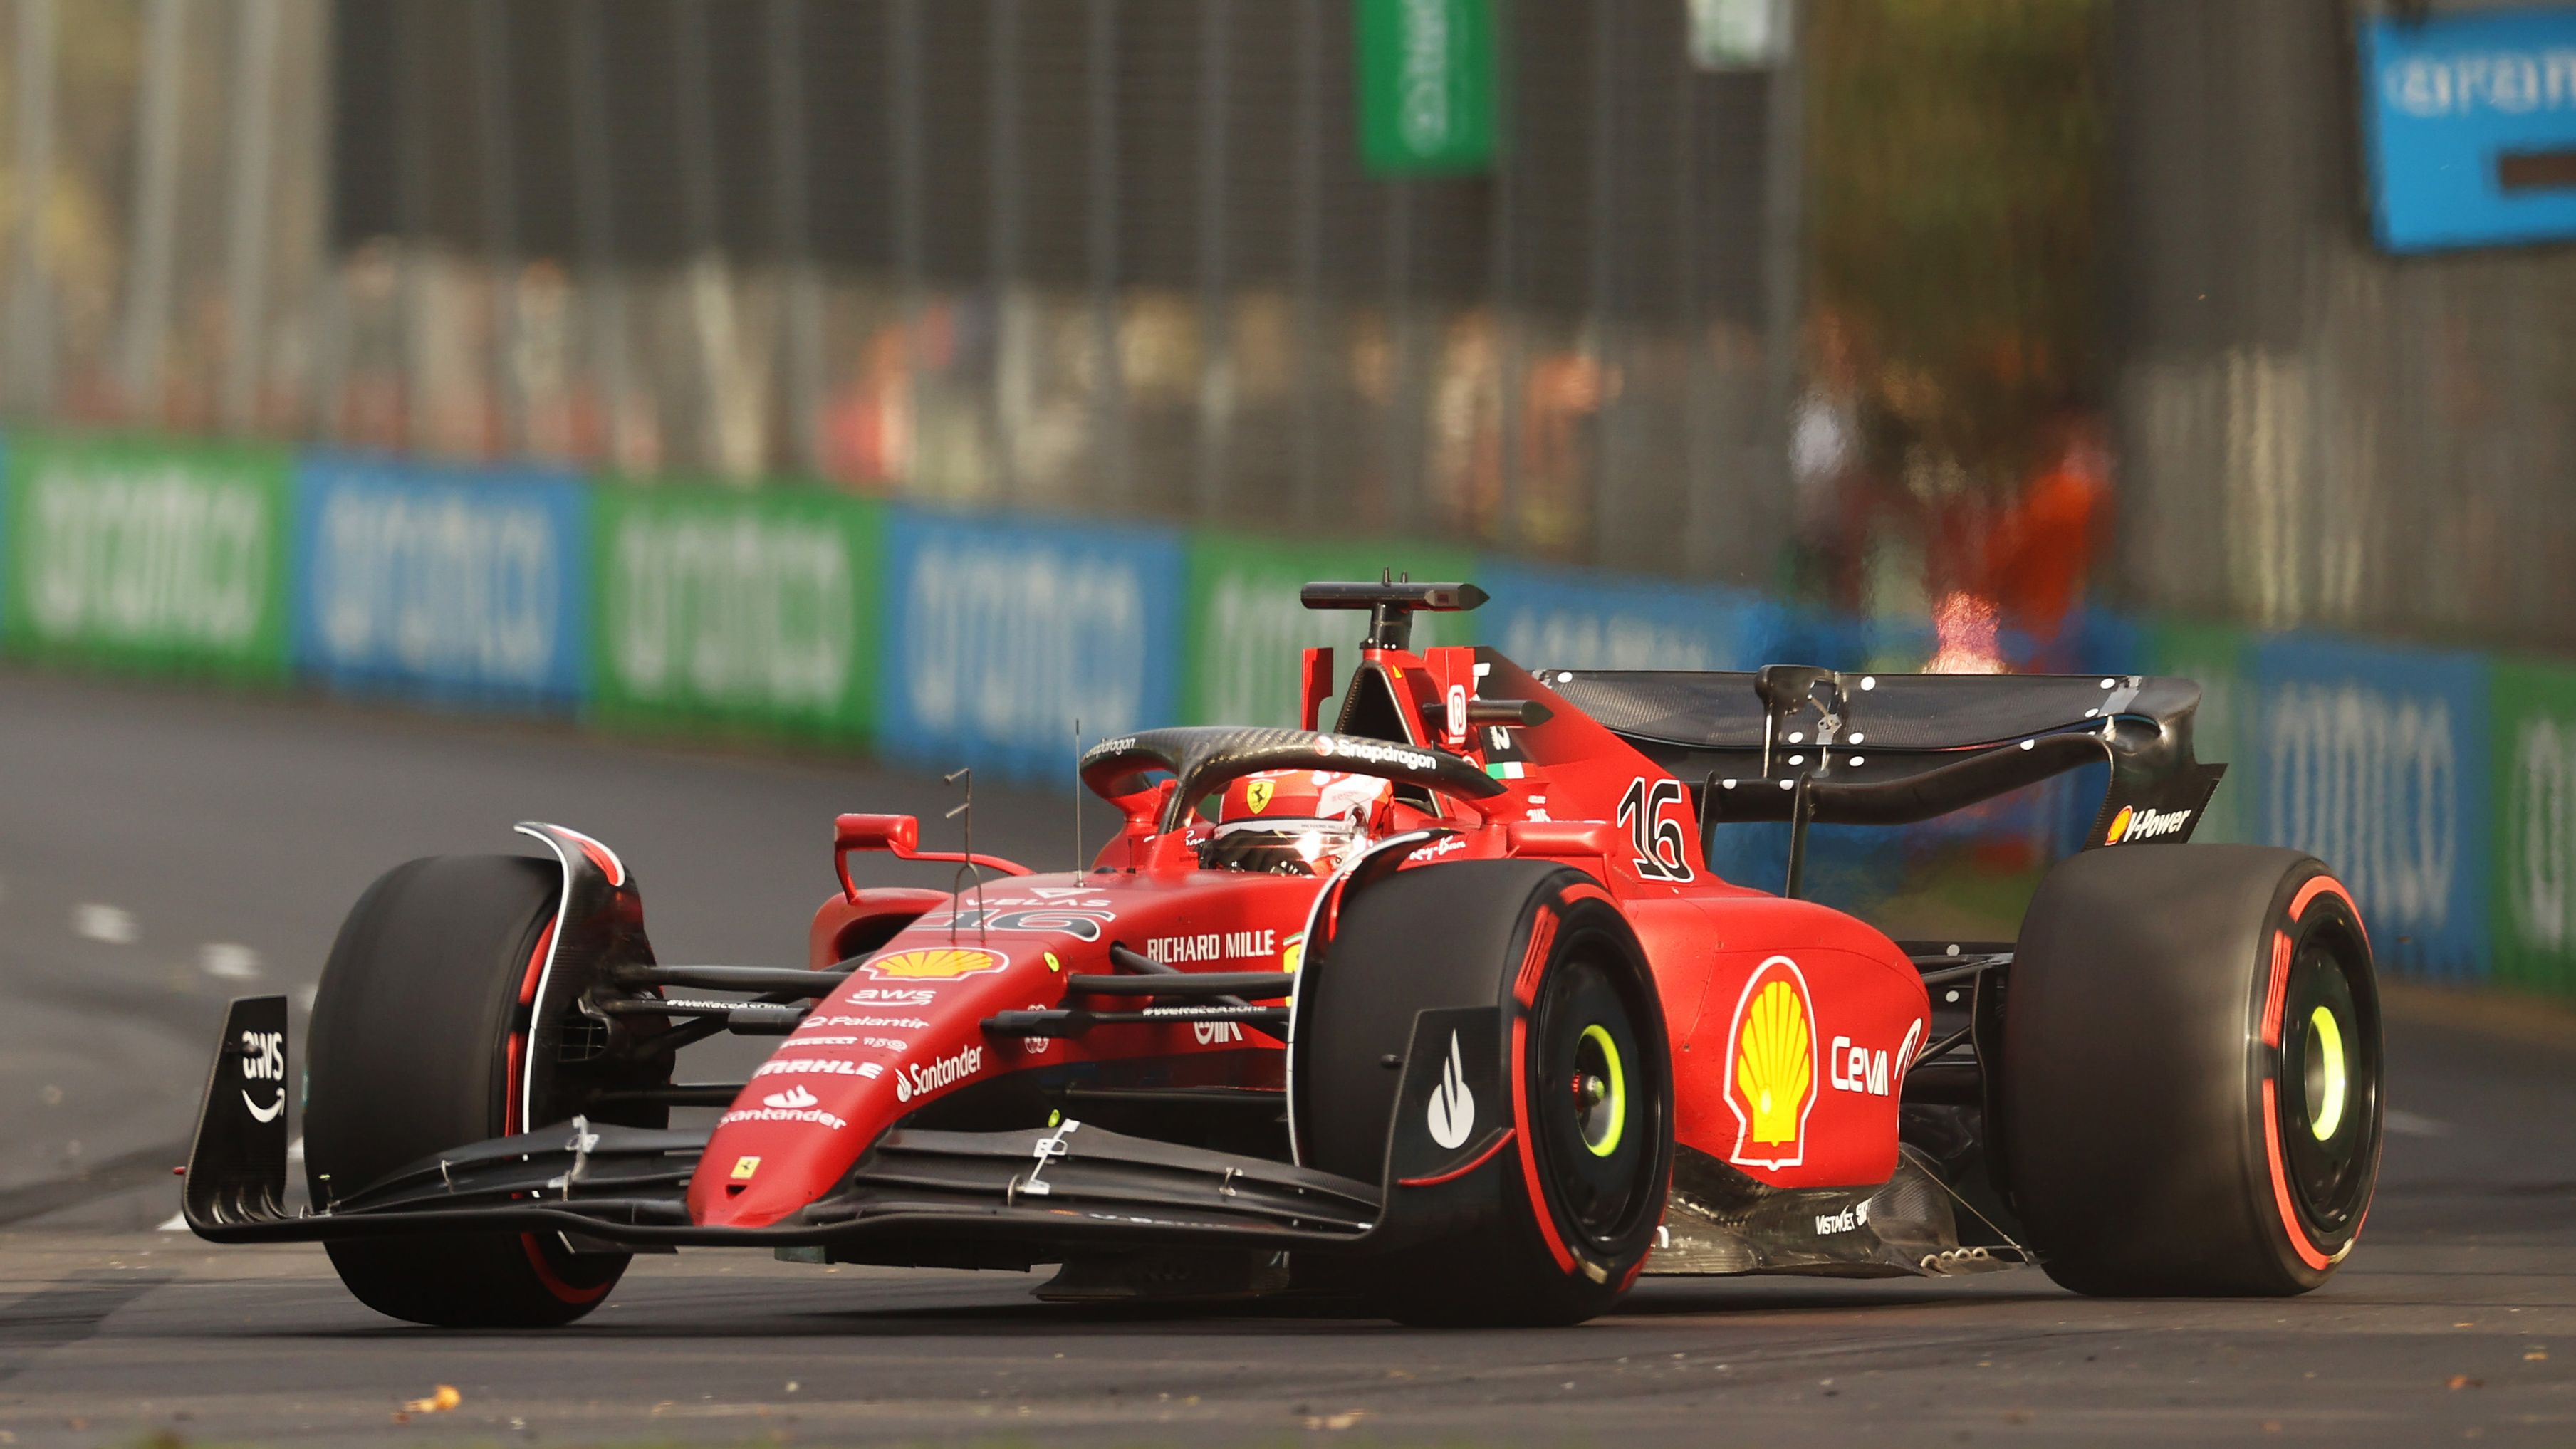 Ferrari fires warning shot in first Melbourne practice session, but dominance not without fault